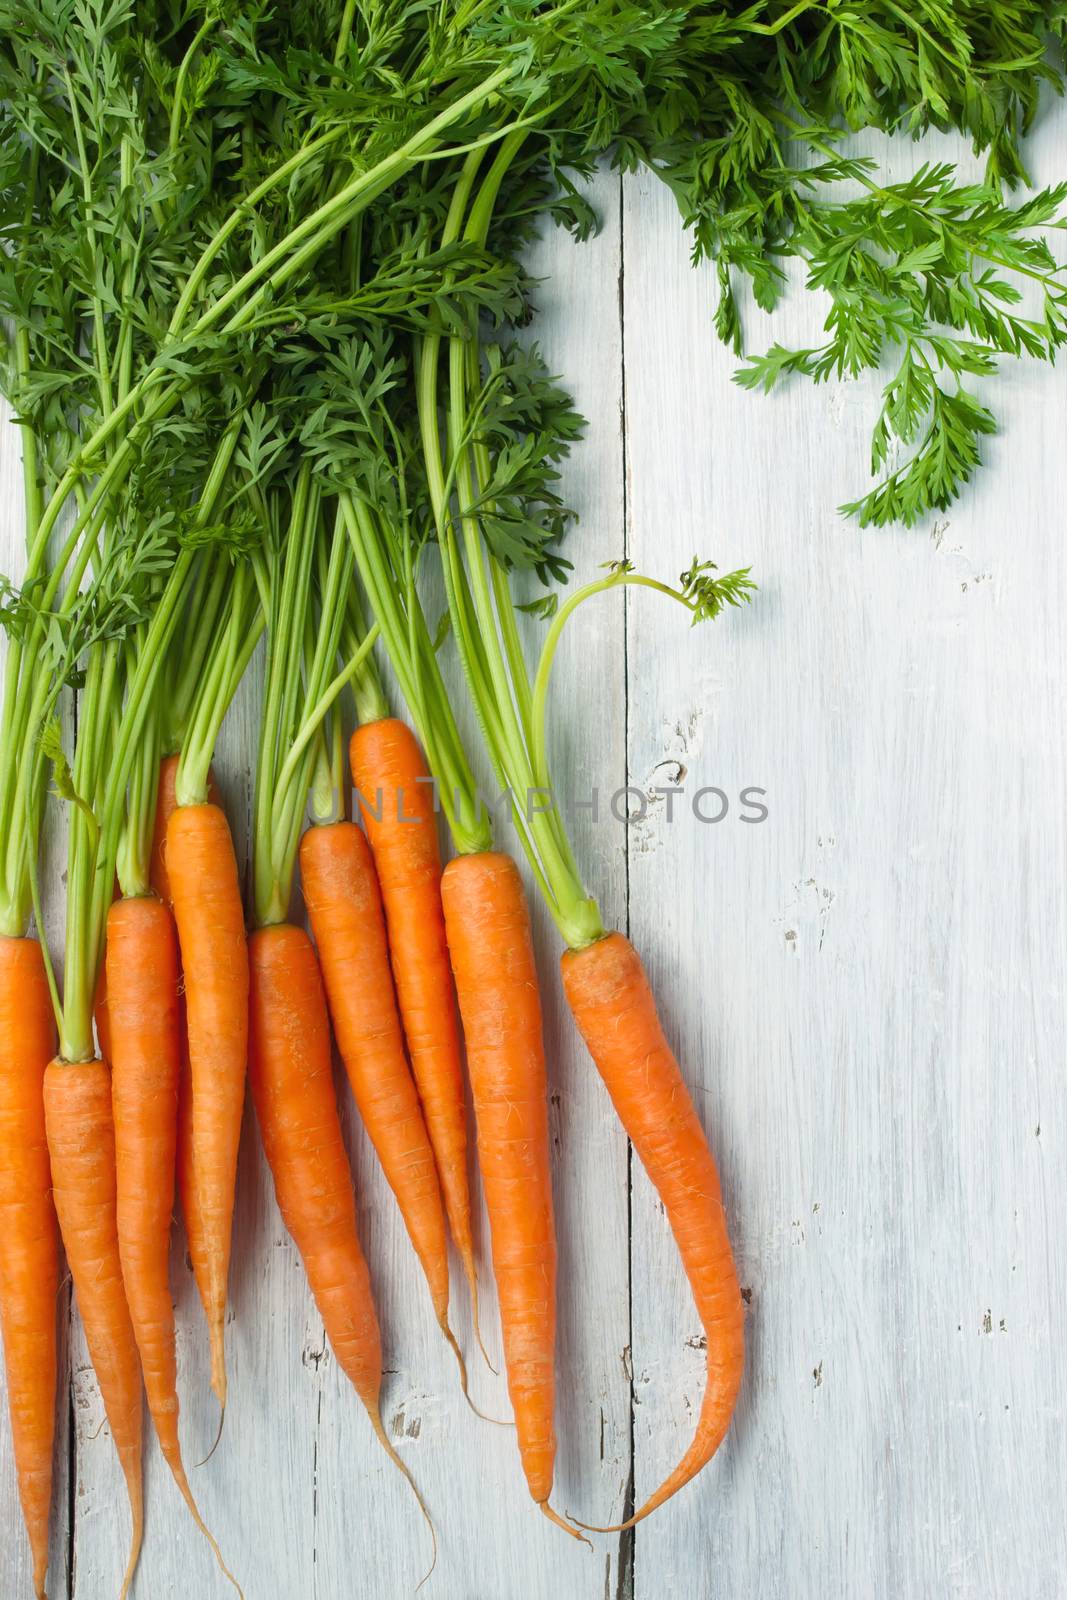 Carrots on the white wooden table vertical